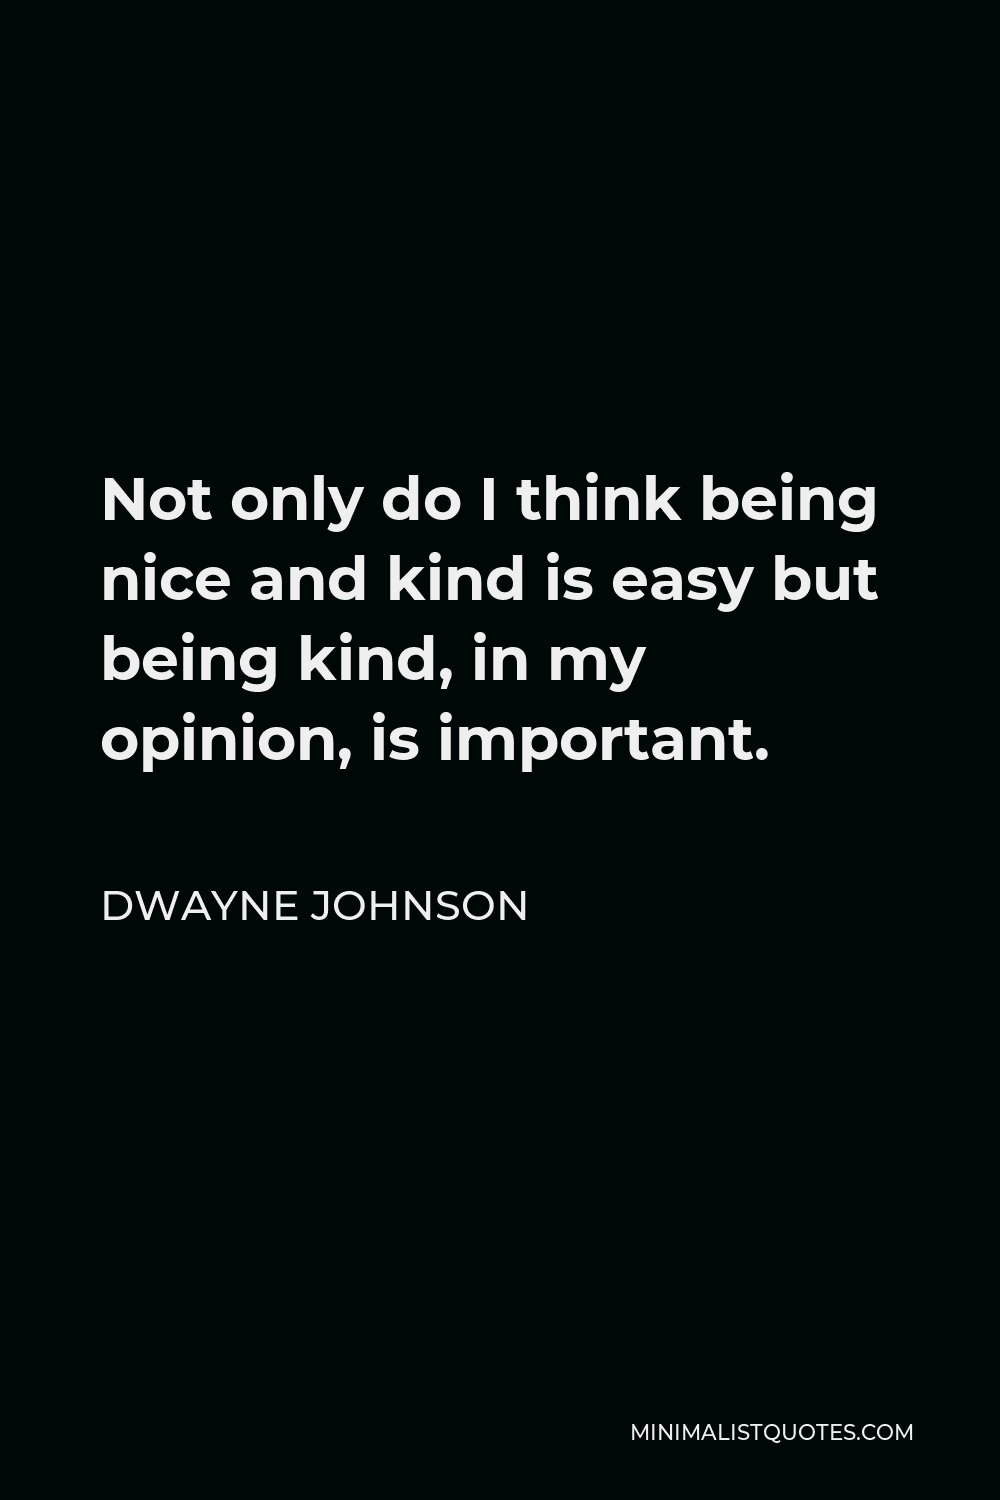 Dwayne Johnson Quote - Not only do I think being nice and kind is easy but being kind, in my opinion, is important.